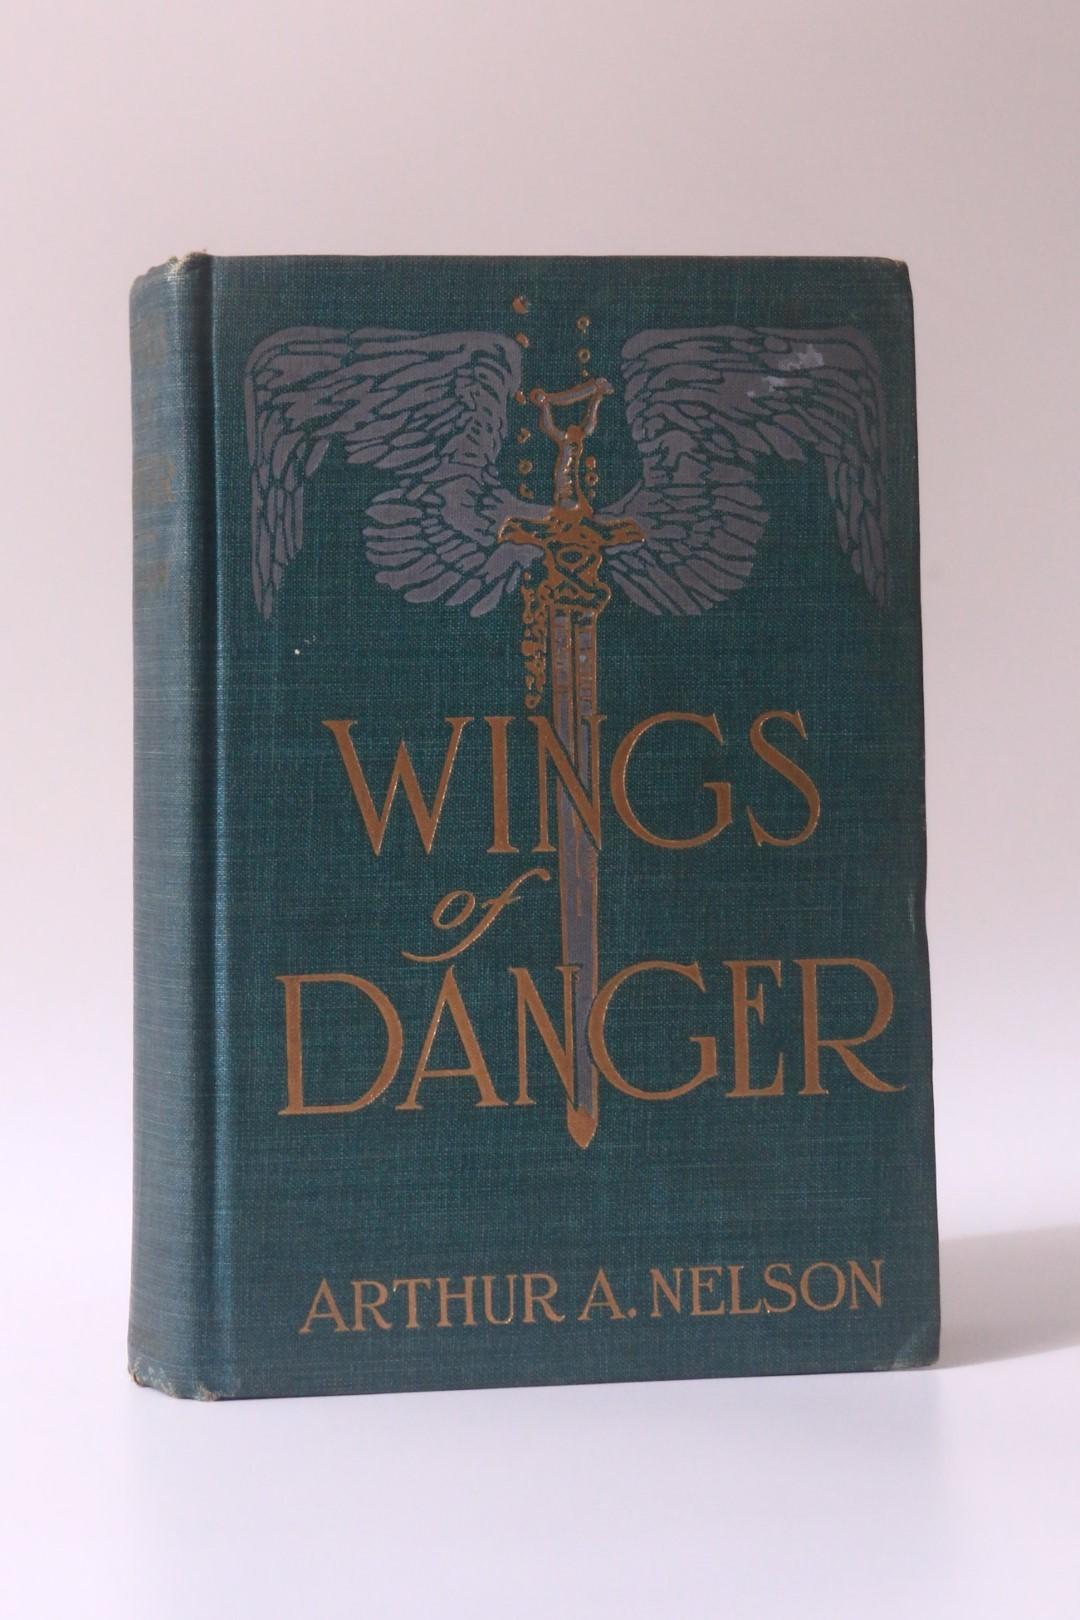 Arthur A. Nelson - Wings of Danger - Robert M. McBride, 1915, Signed First Edition.